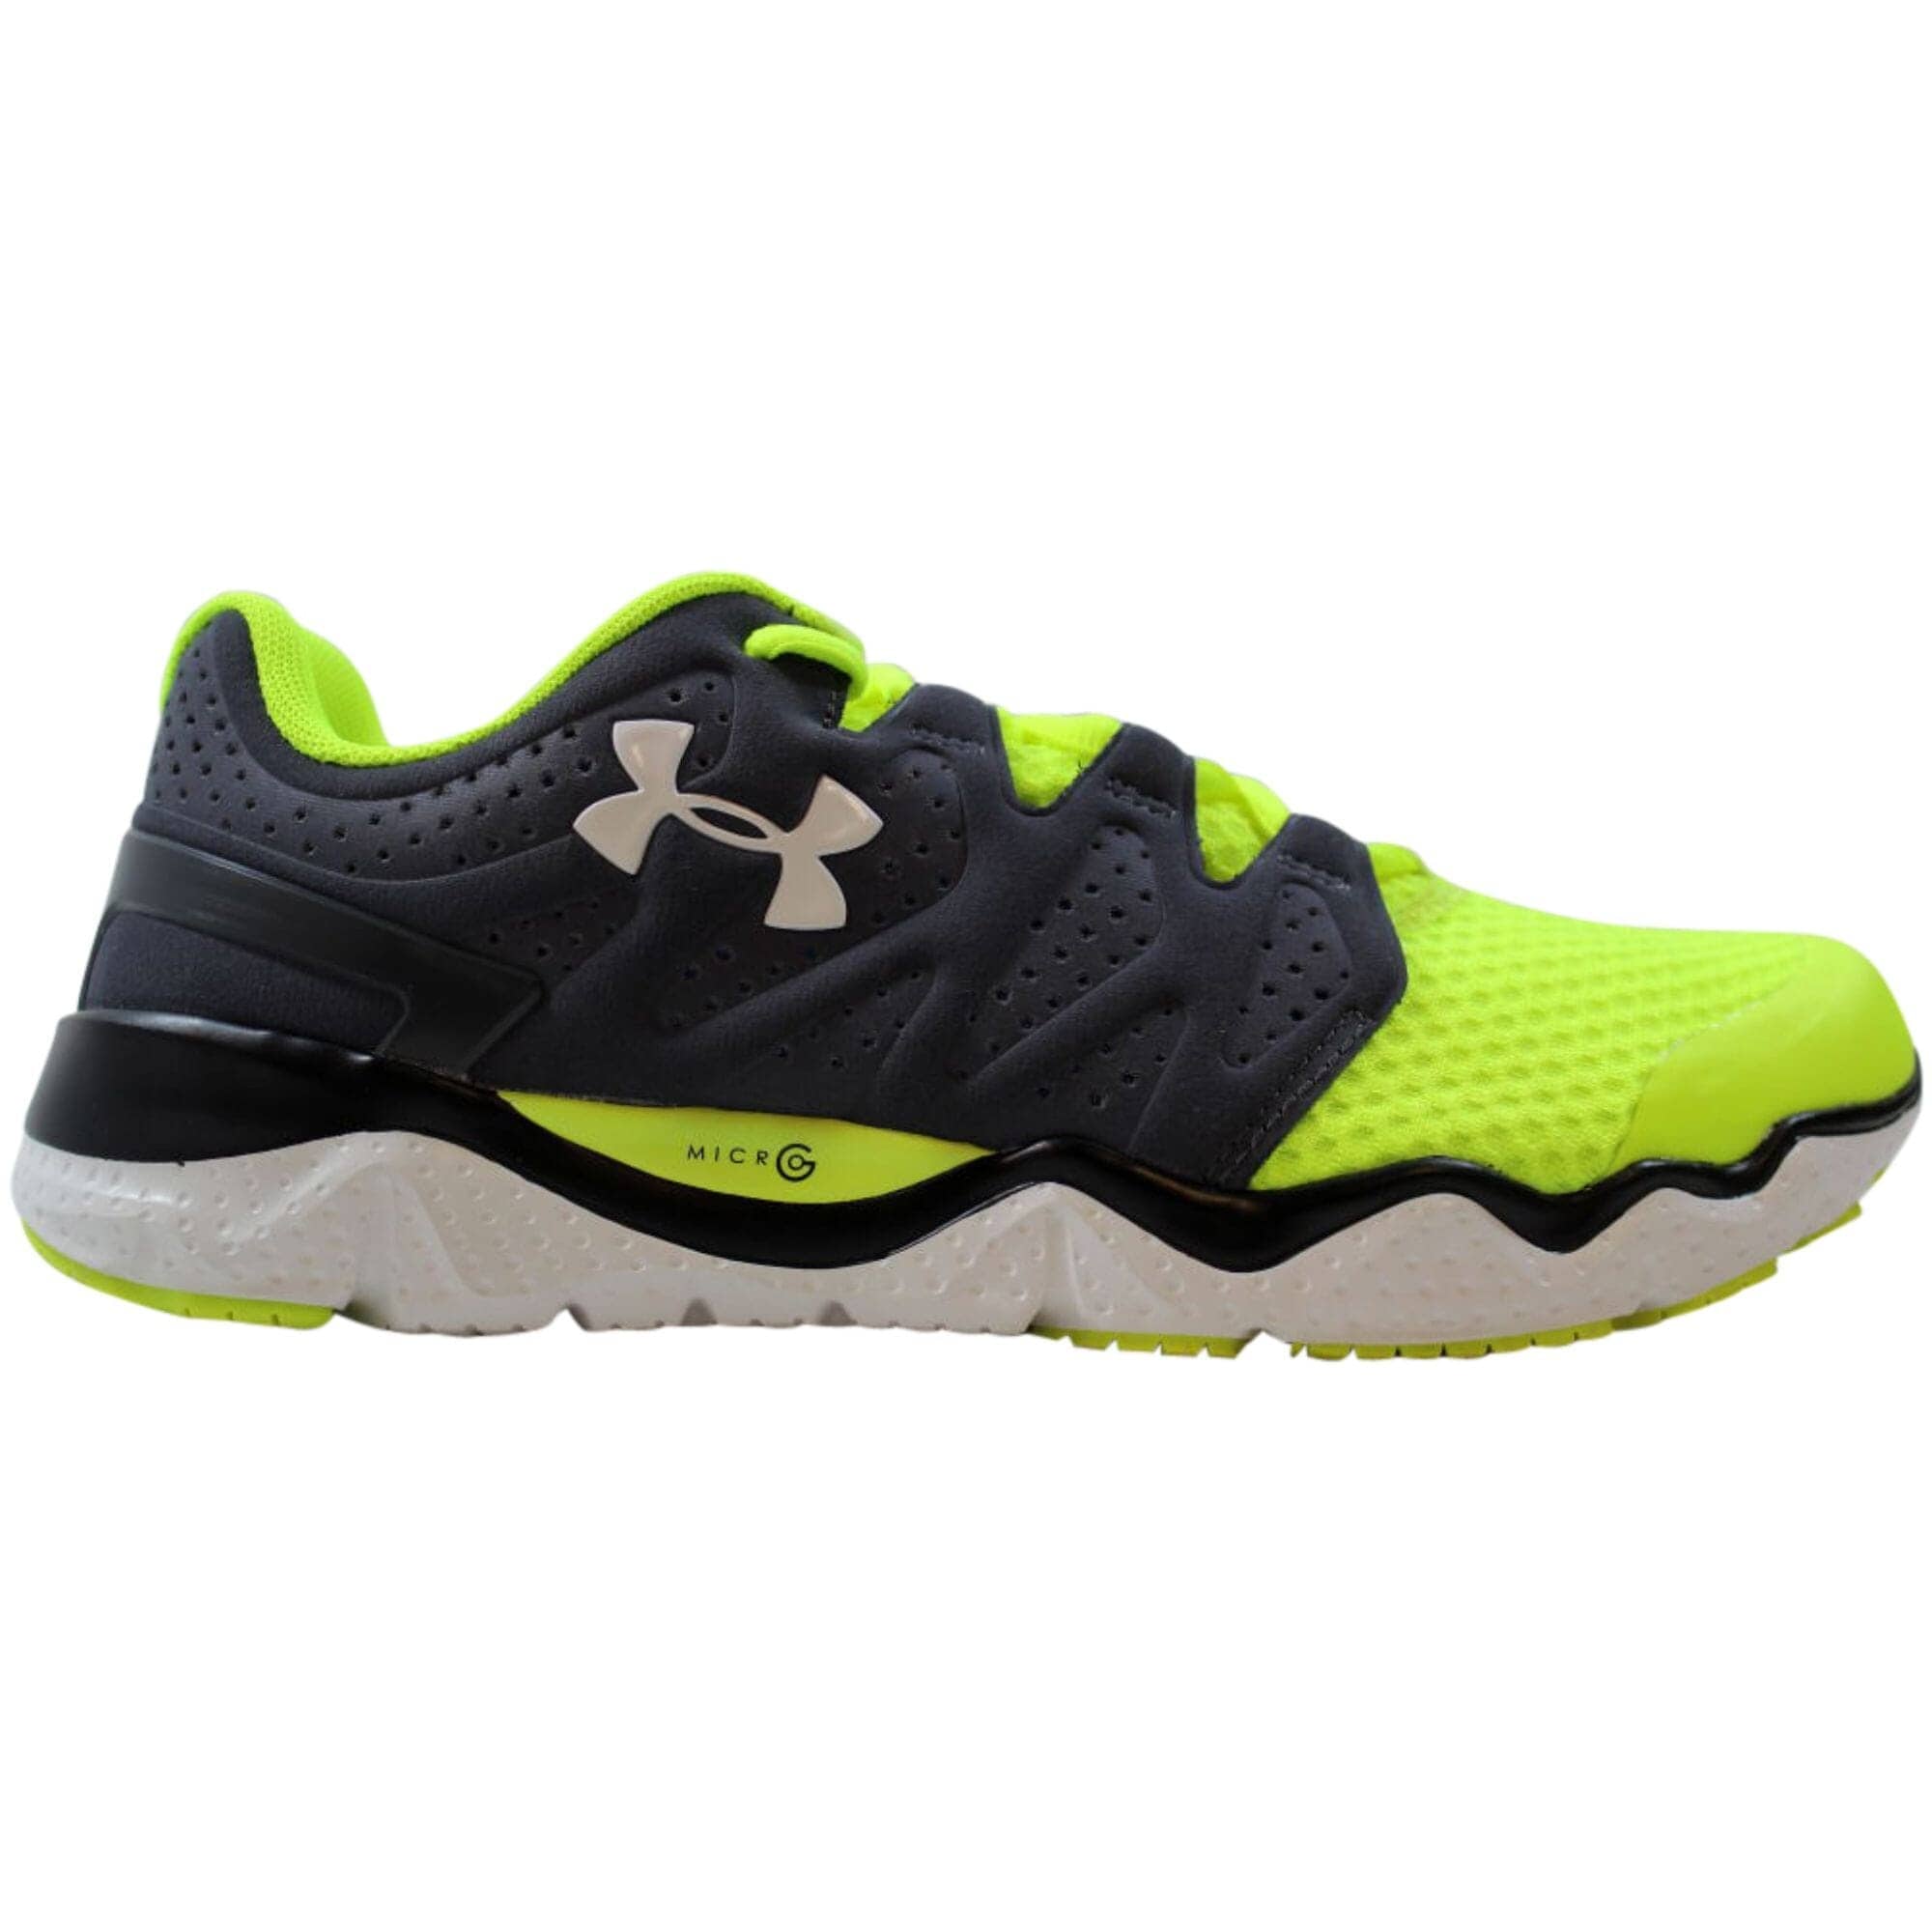 under armor micro shoes